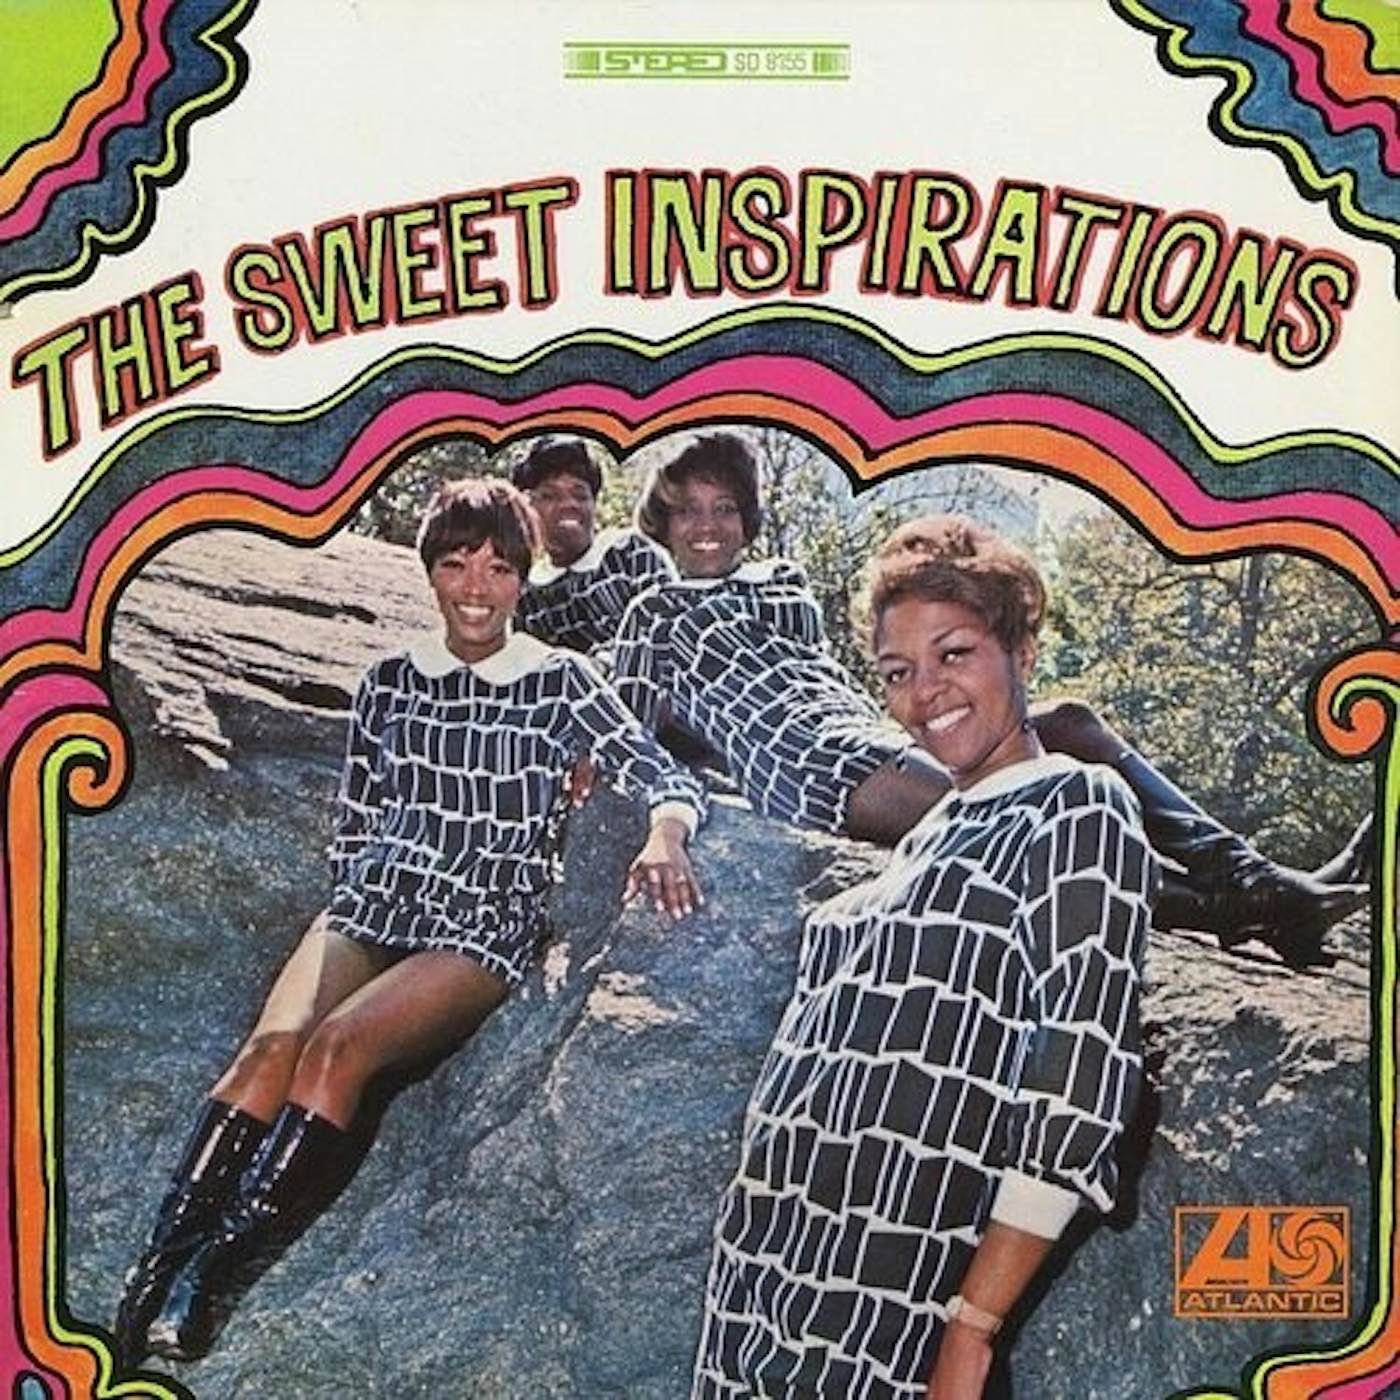 The Sweet Inspirations Vinyl Record - Gold Disc